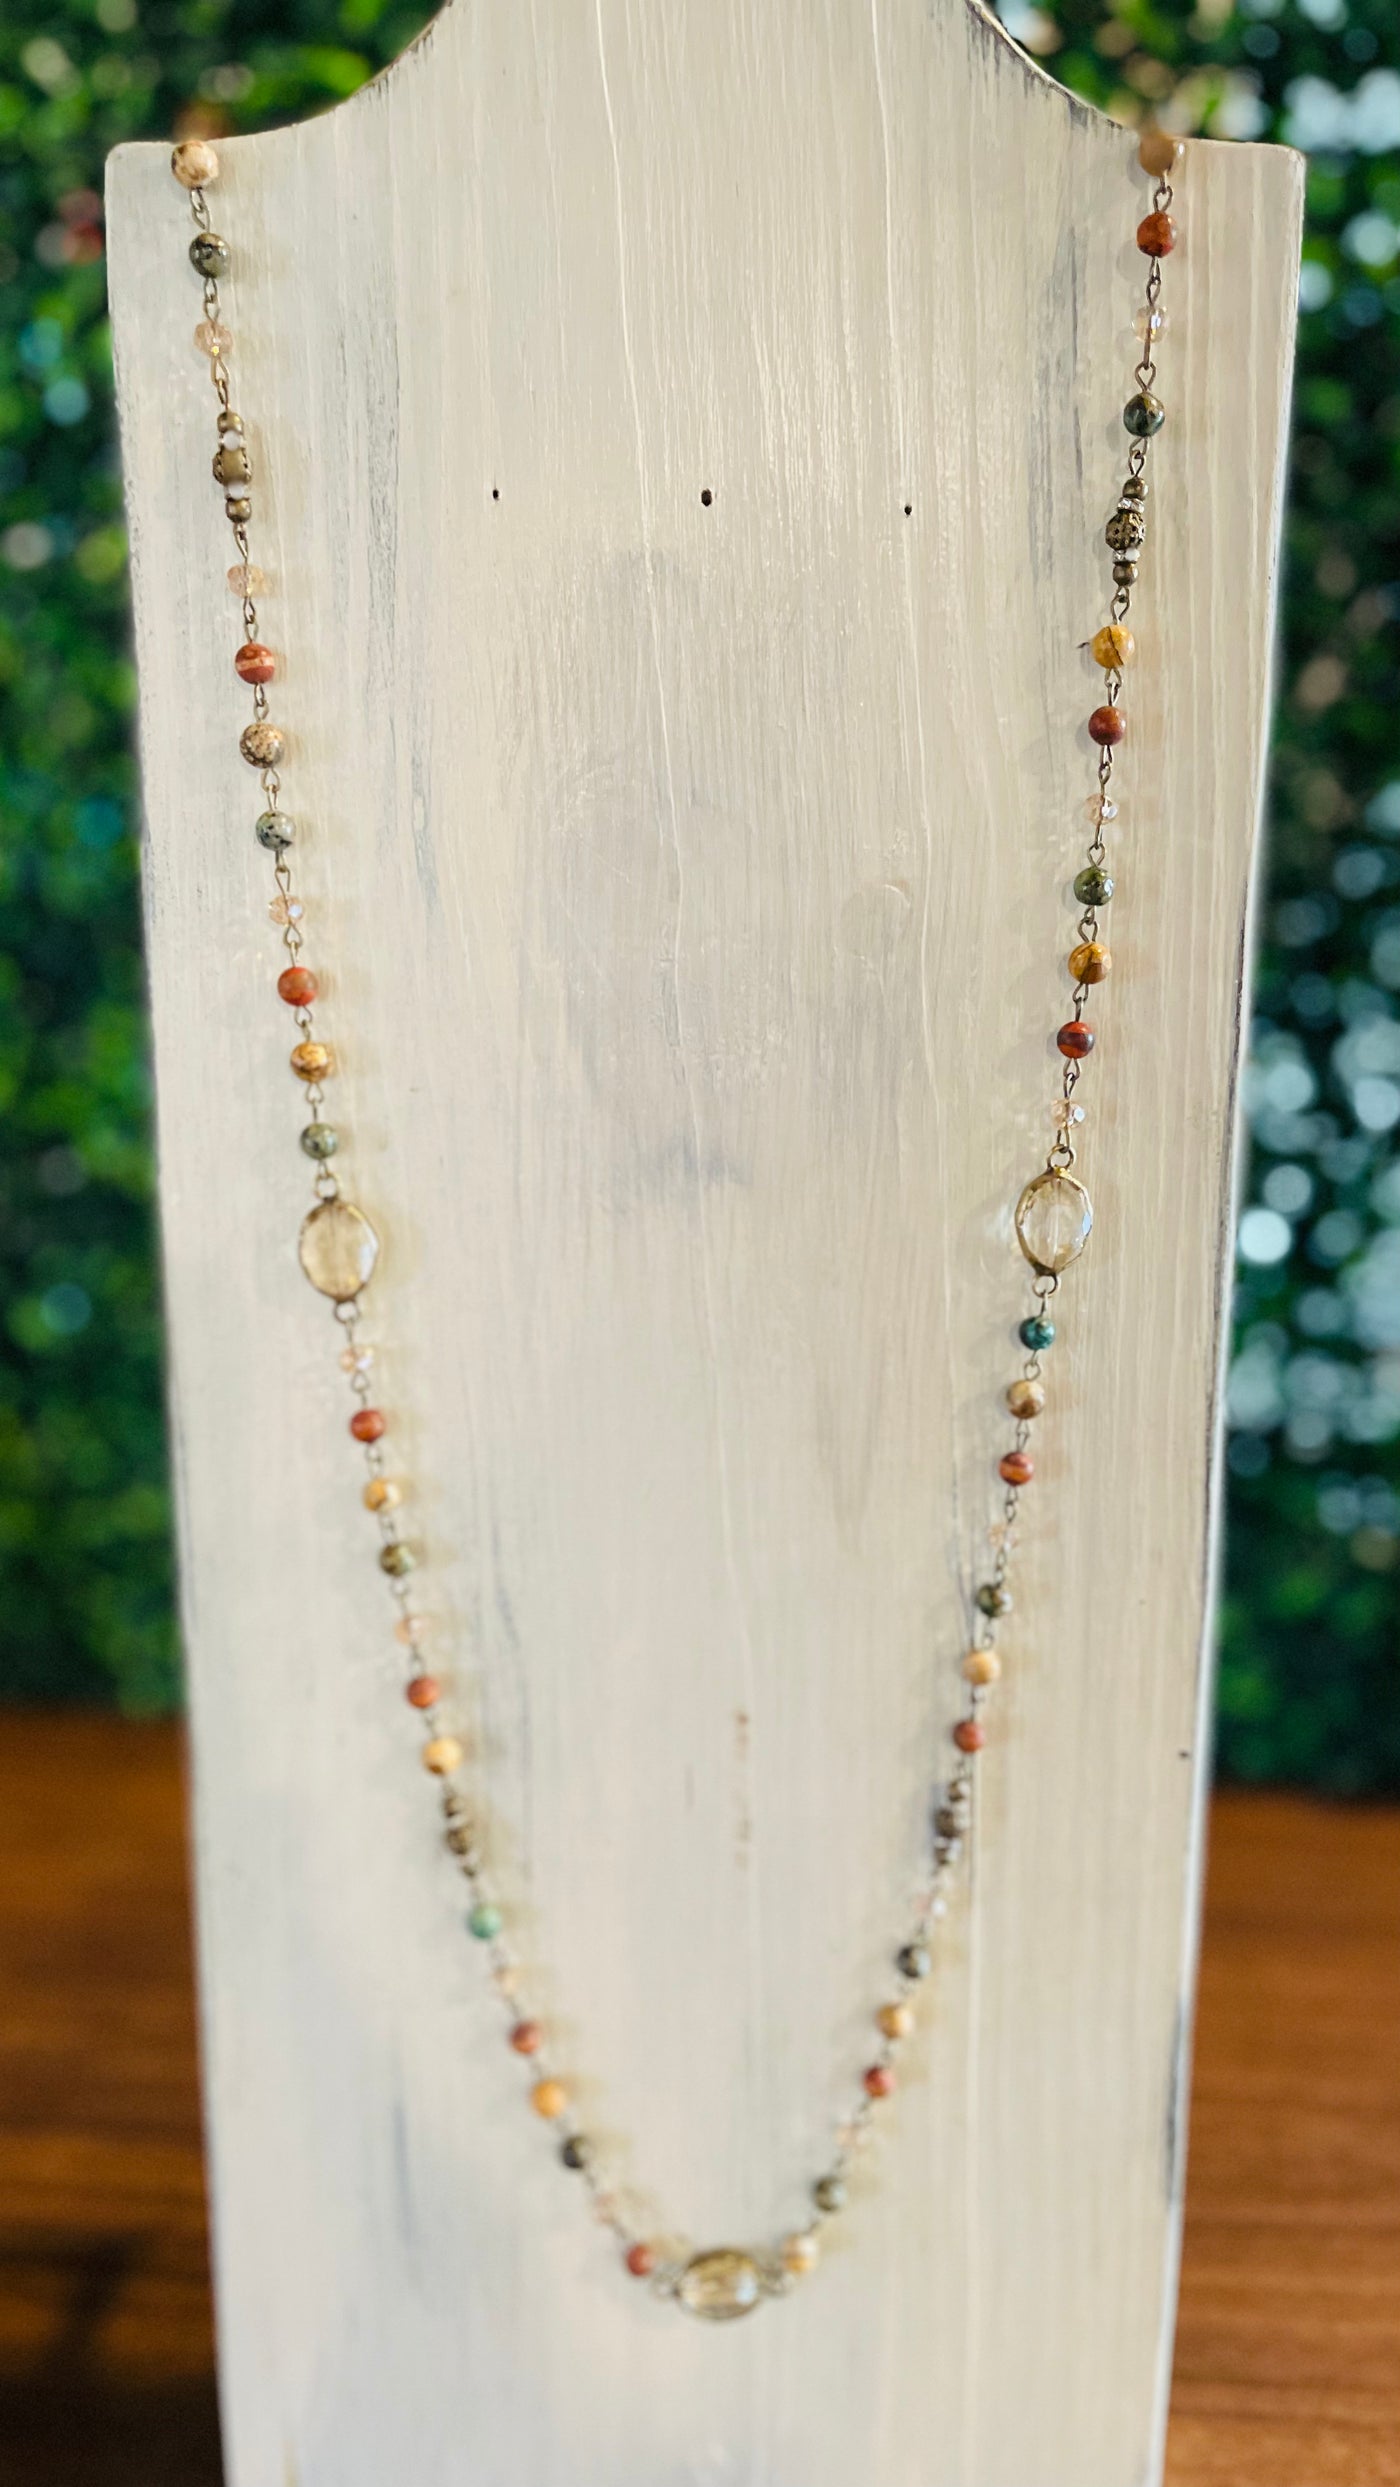 Long Natural Stone Beaded Necklace with Small Brass and Crystal Pendants